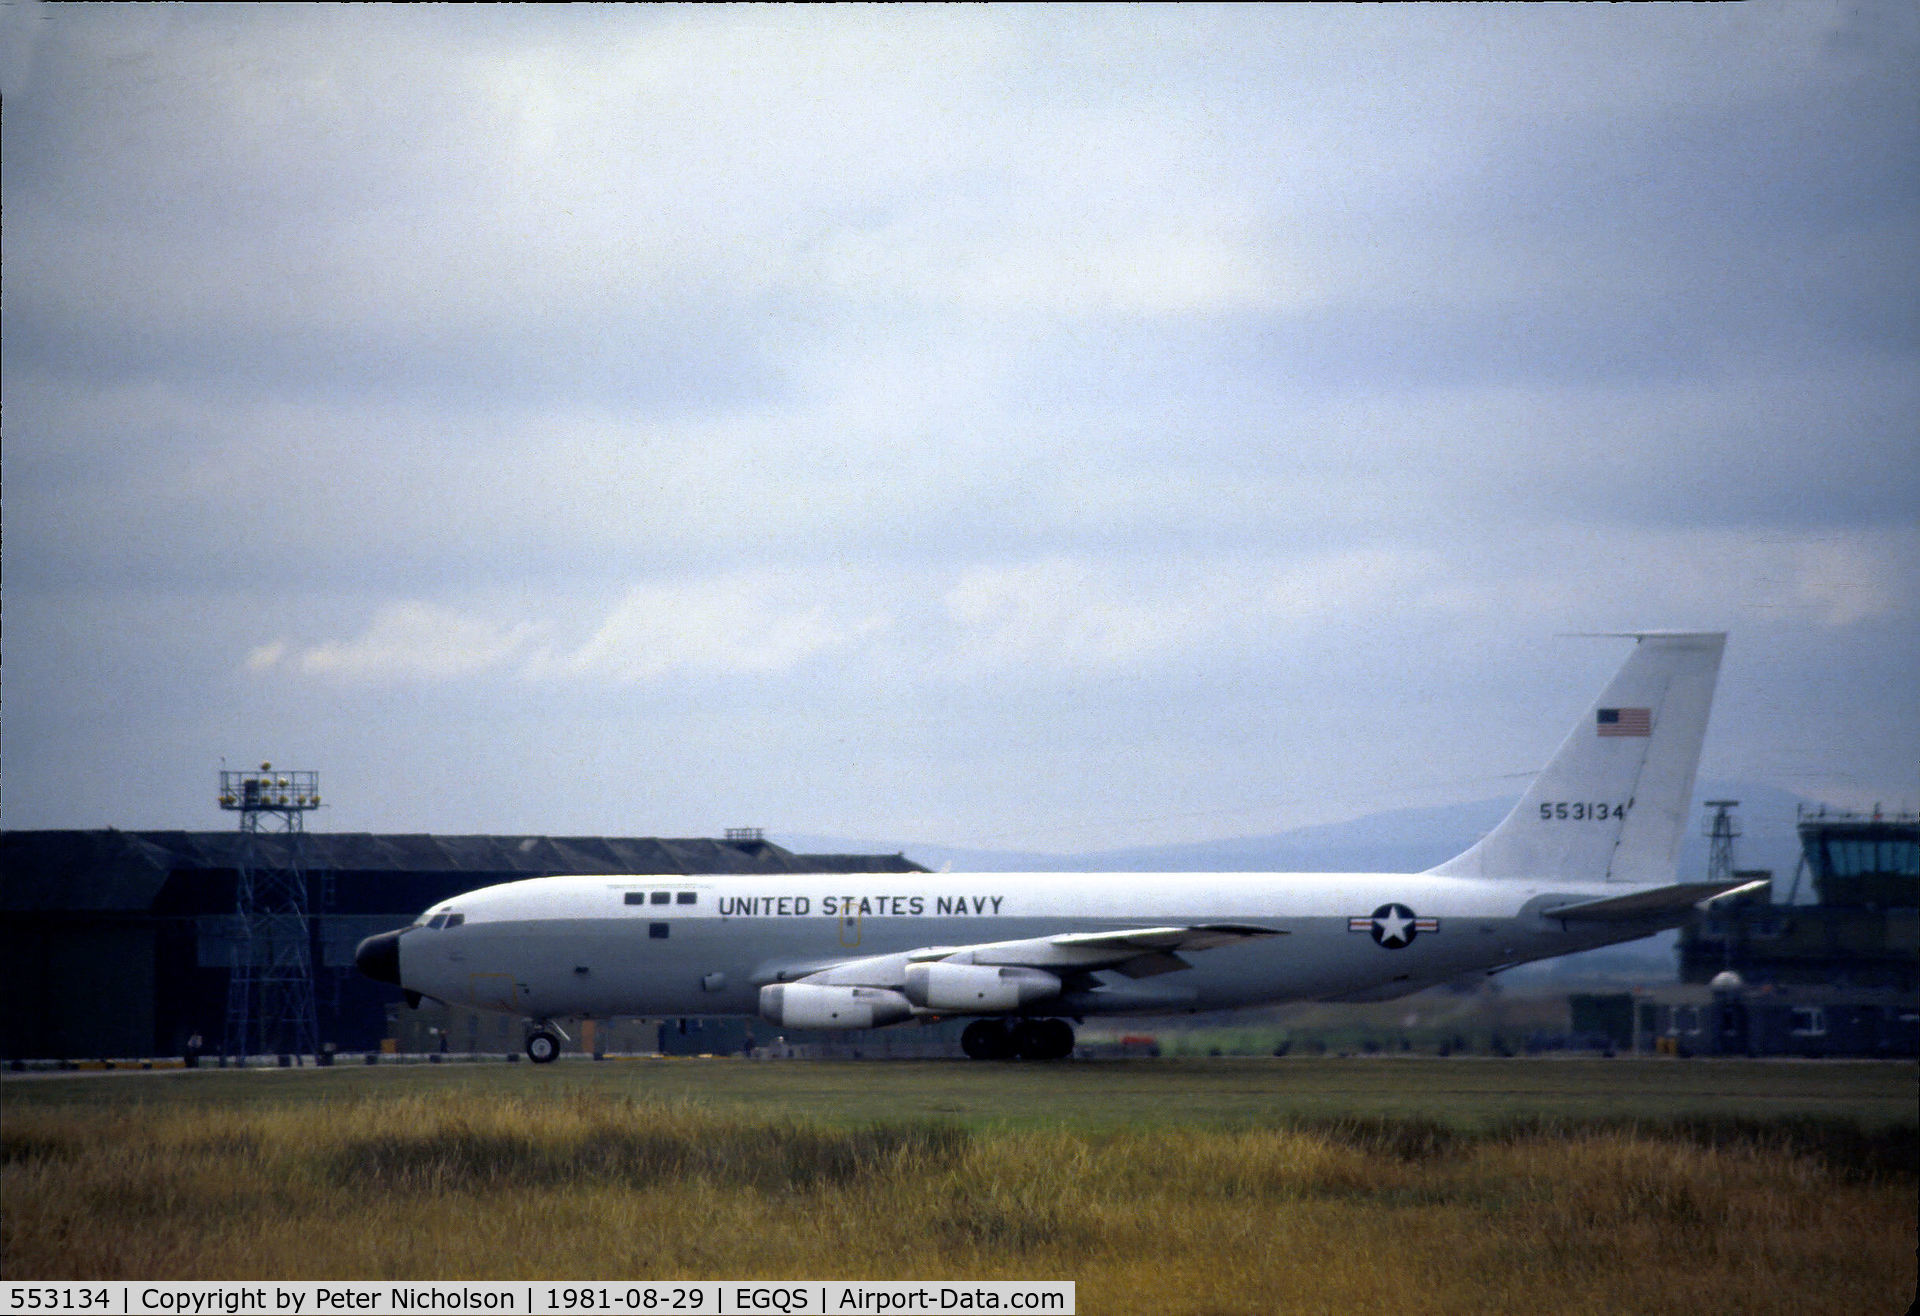 553134, 1955 Boeing NKC-135A Stratotanker C/N 17250, NKC-135A of the US Navy's Fleet Electronic Warfare Support Group [FEWSG] active at RAF Lossiemouth during Exercise Ocean Venture in August 1981.